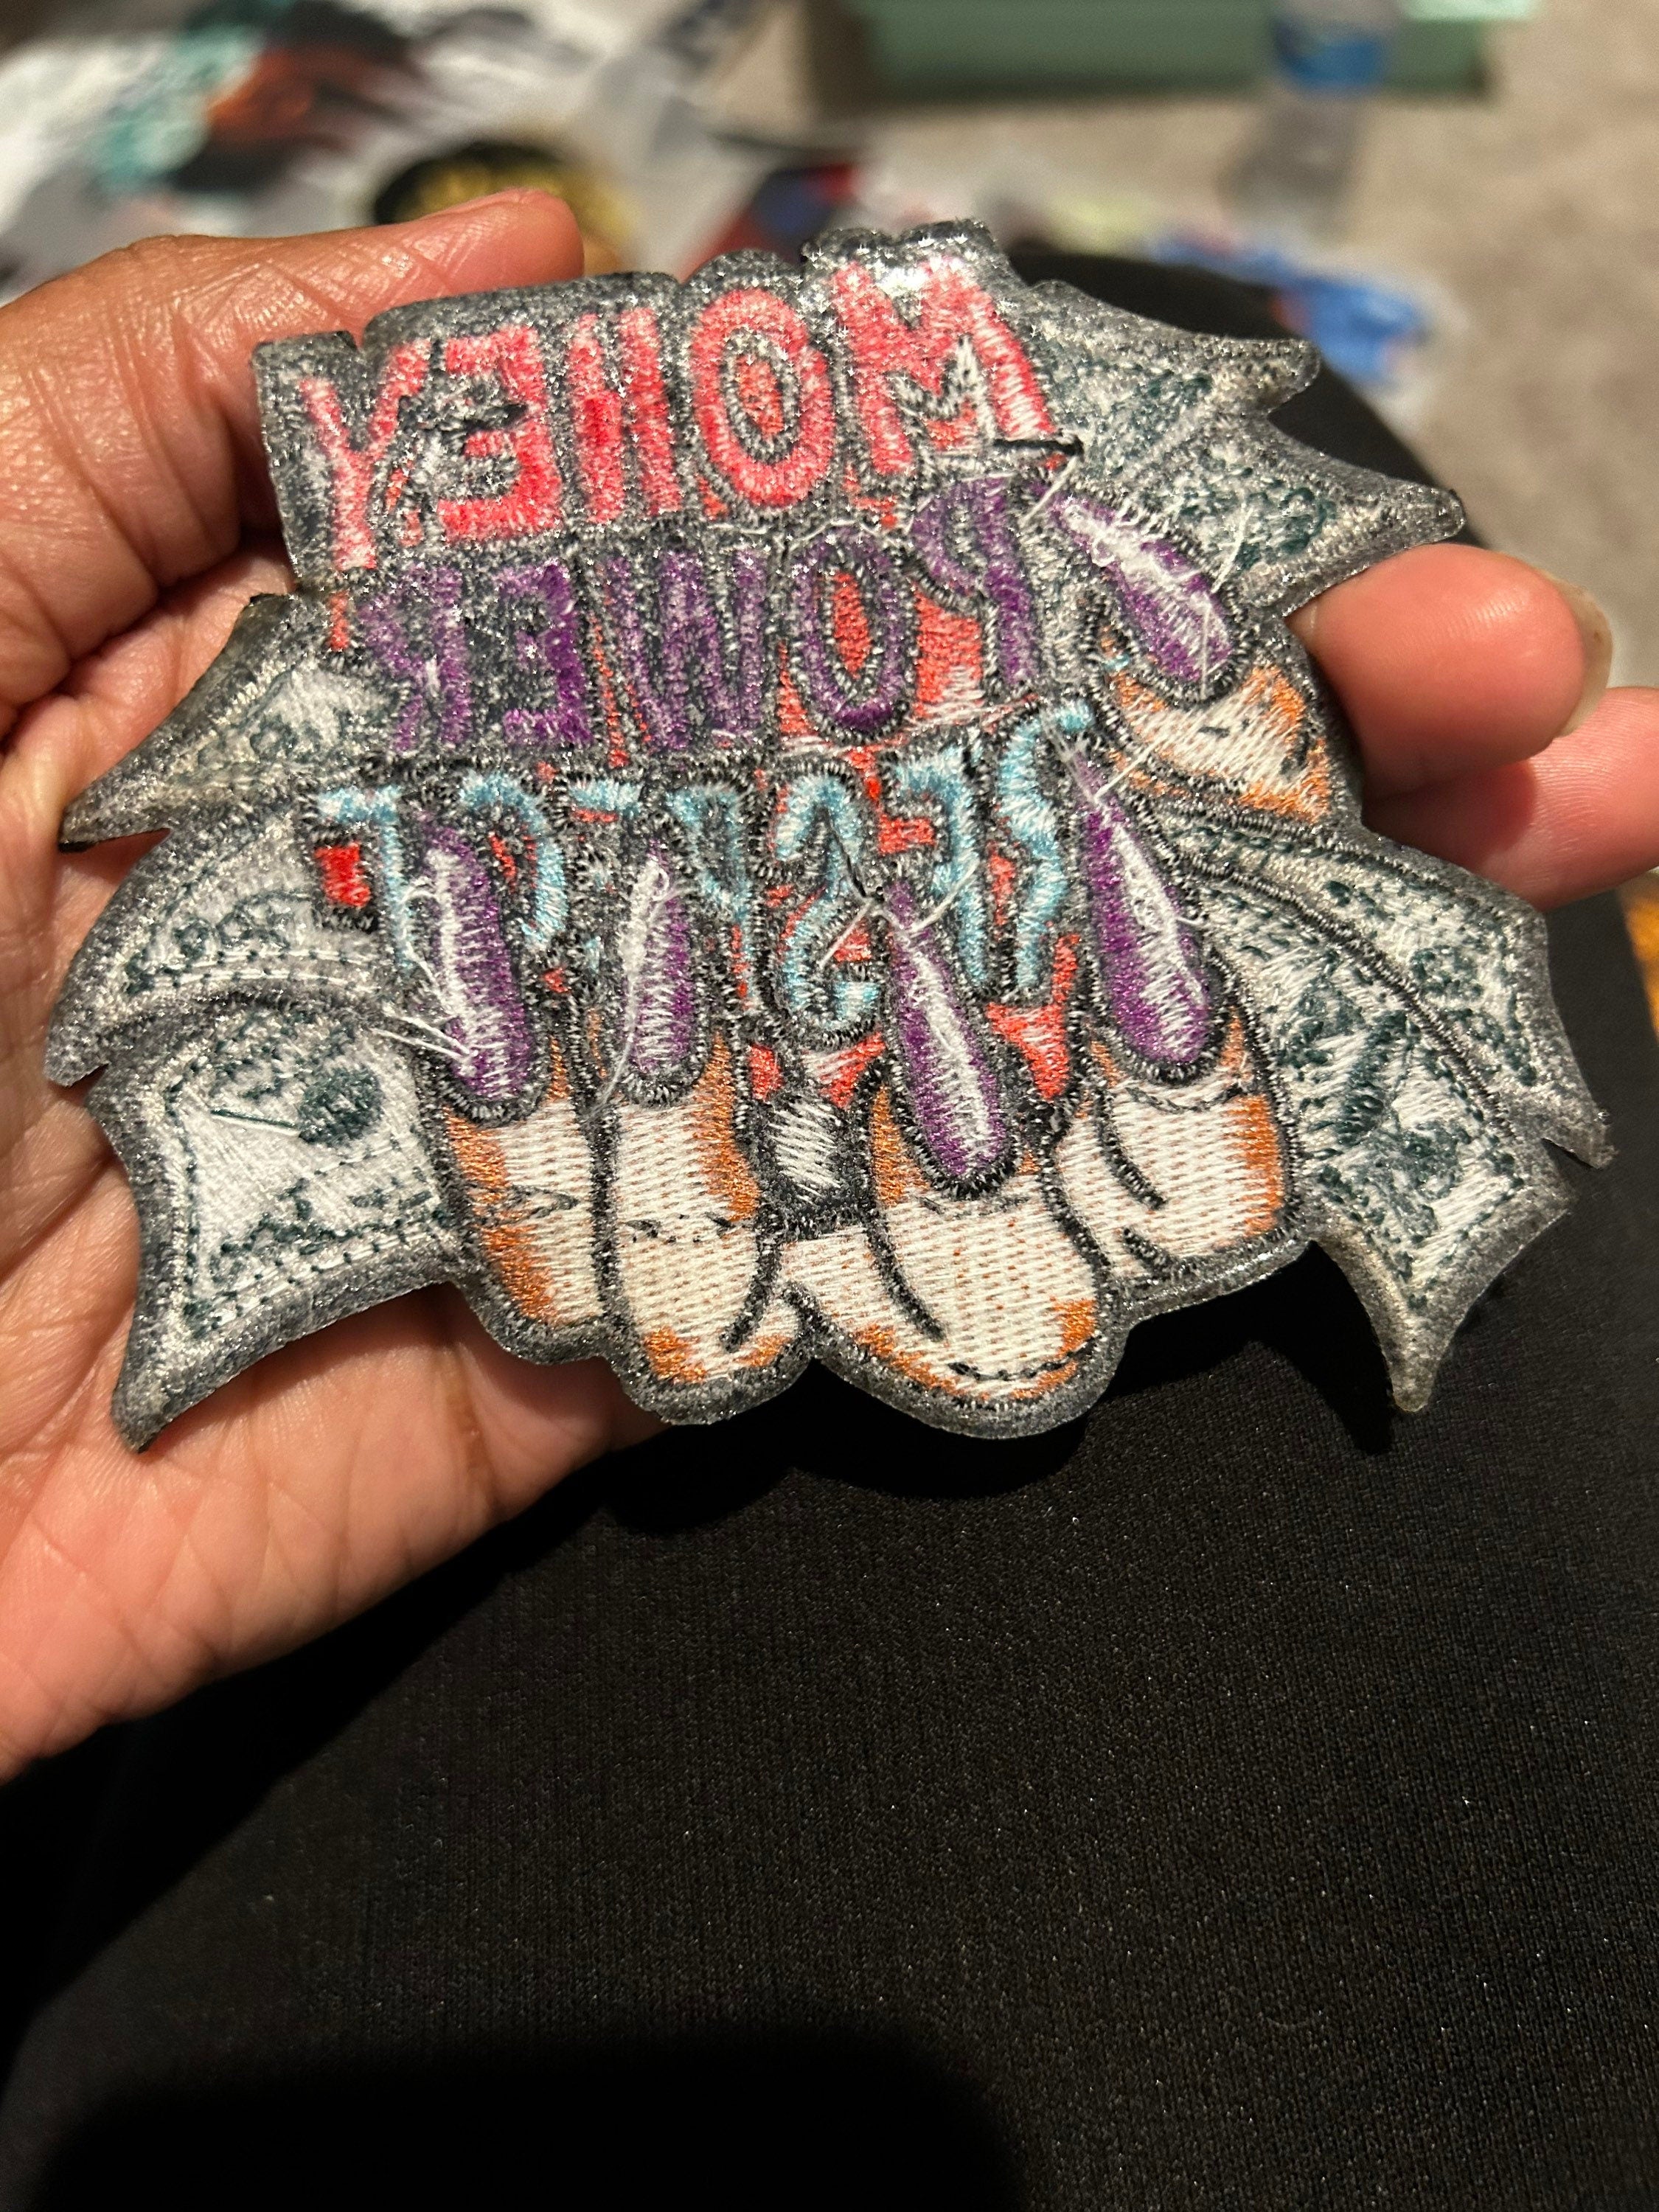 Money, Power,Respect. Iron or Sew on Patch